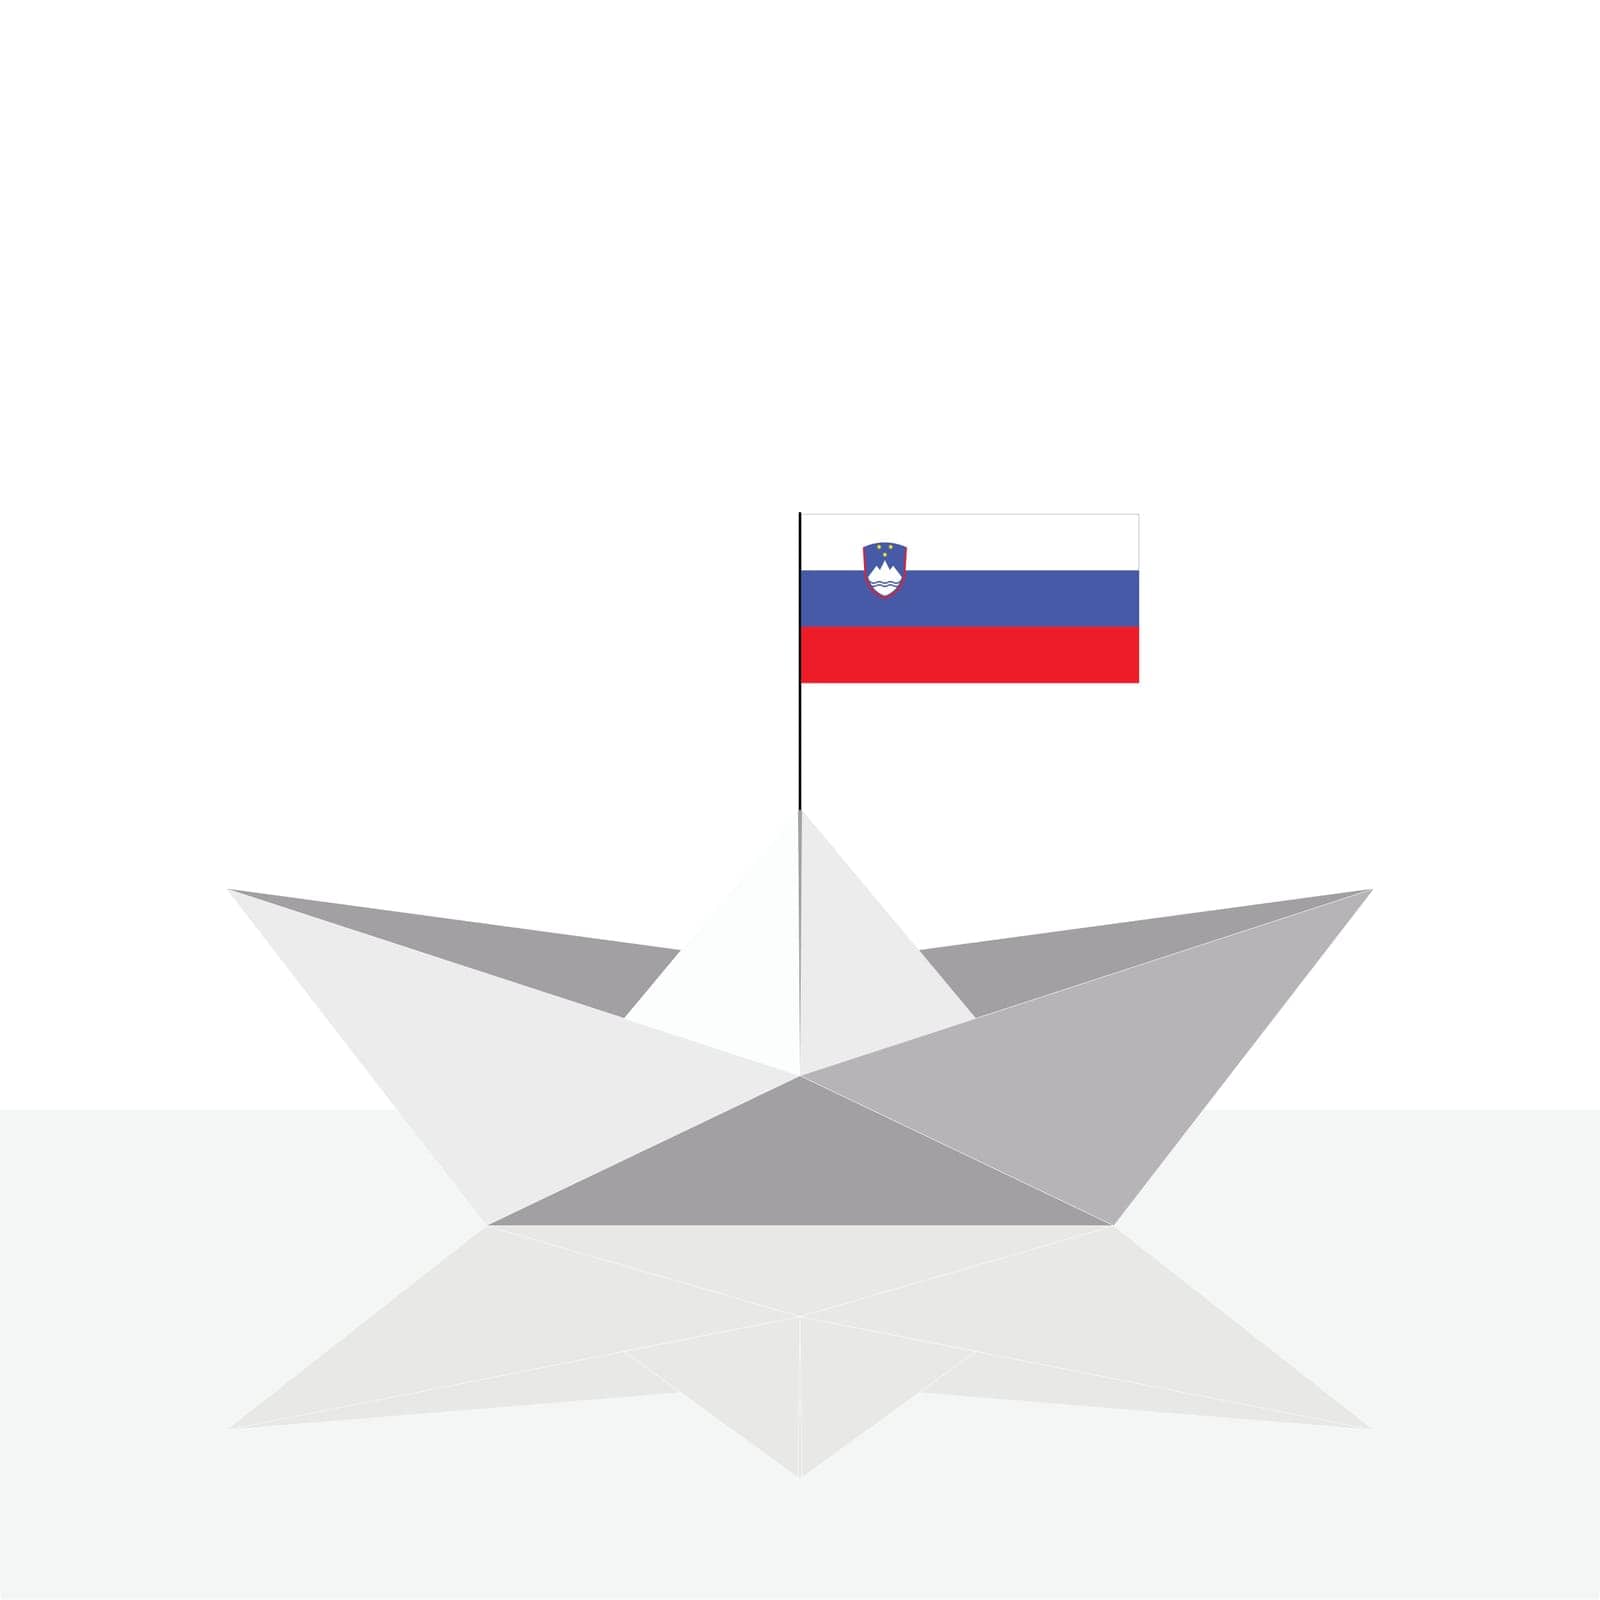 Origami paper ship with reflection and Slovenia flag. Vector flat illustration.